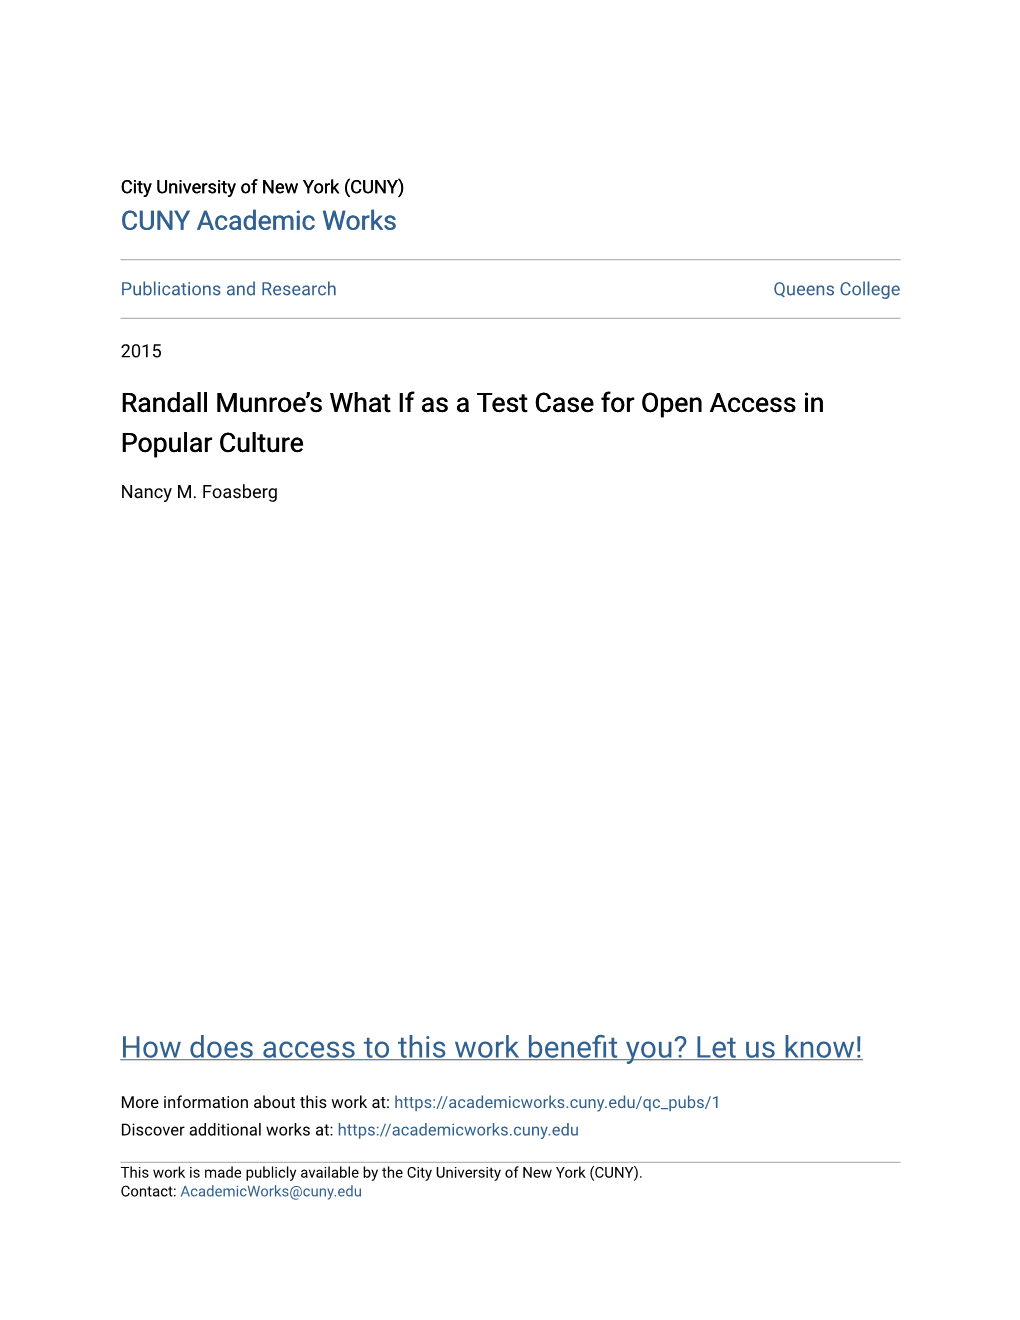 Randall Munroe's What If As a Test Case for Open Access in Popular